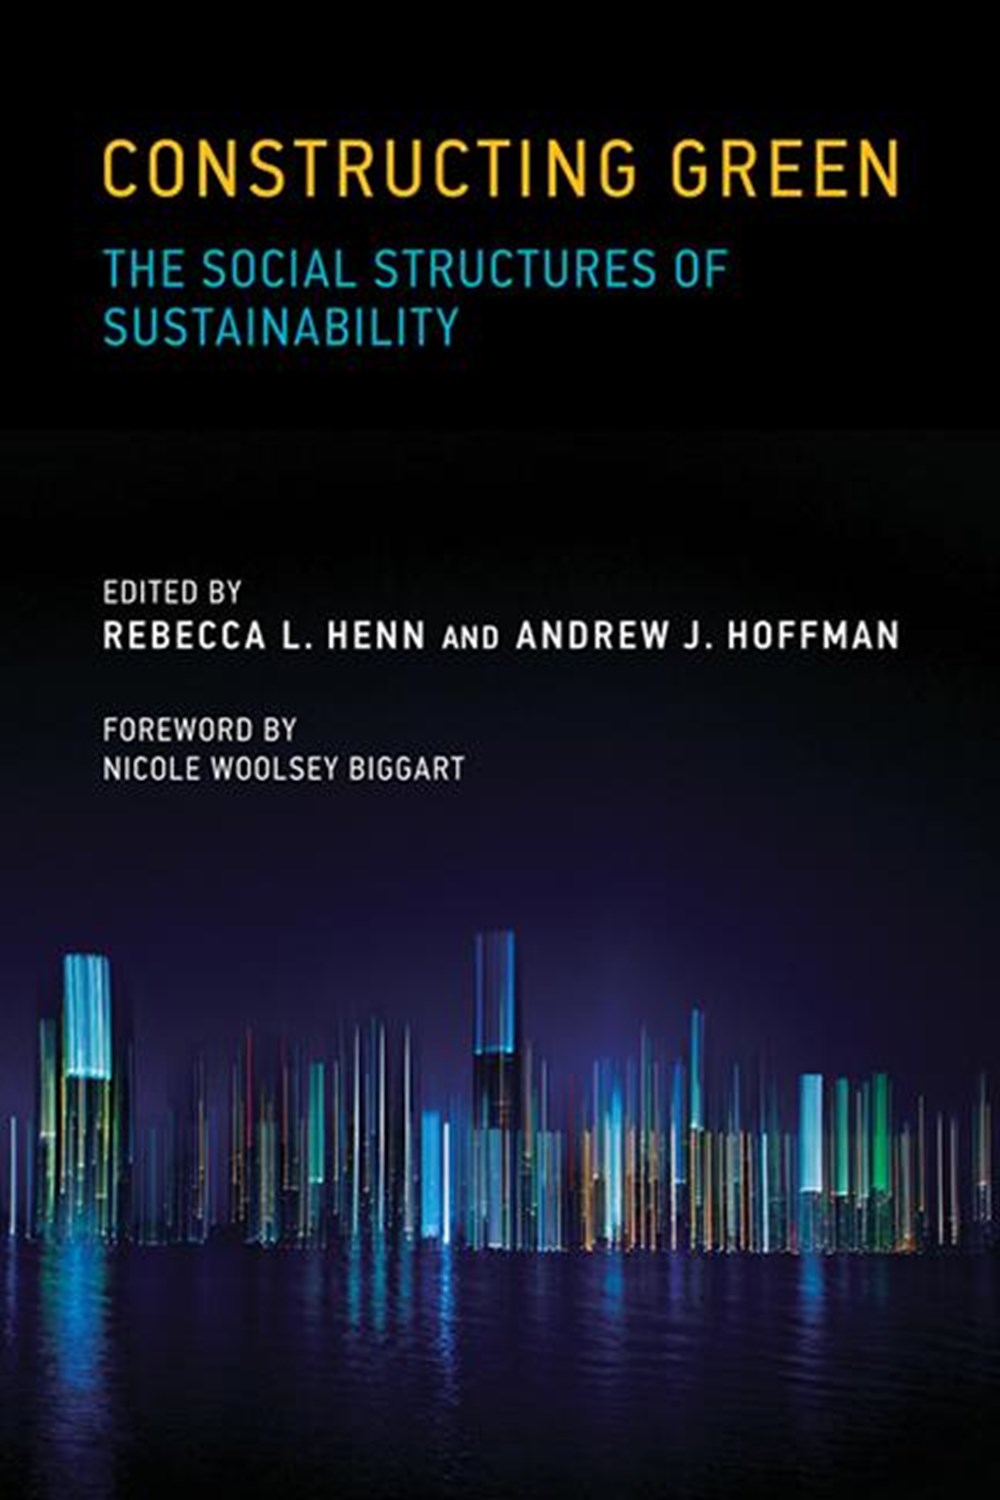 Constructing Green: The Social Structures of Sustainability